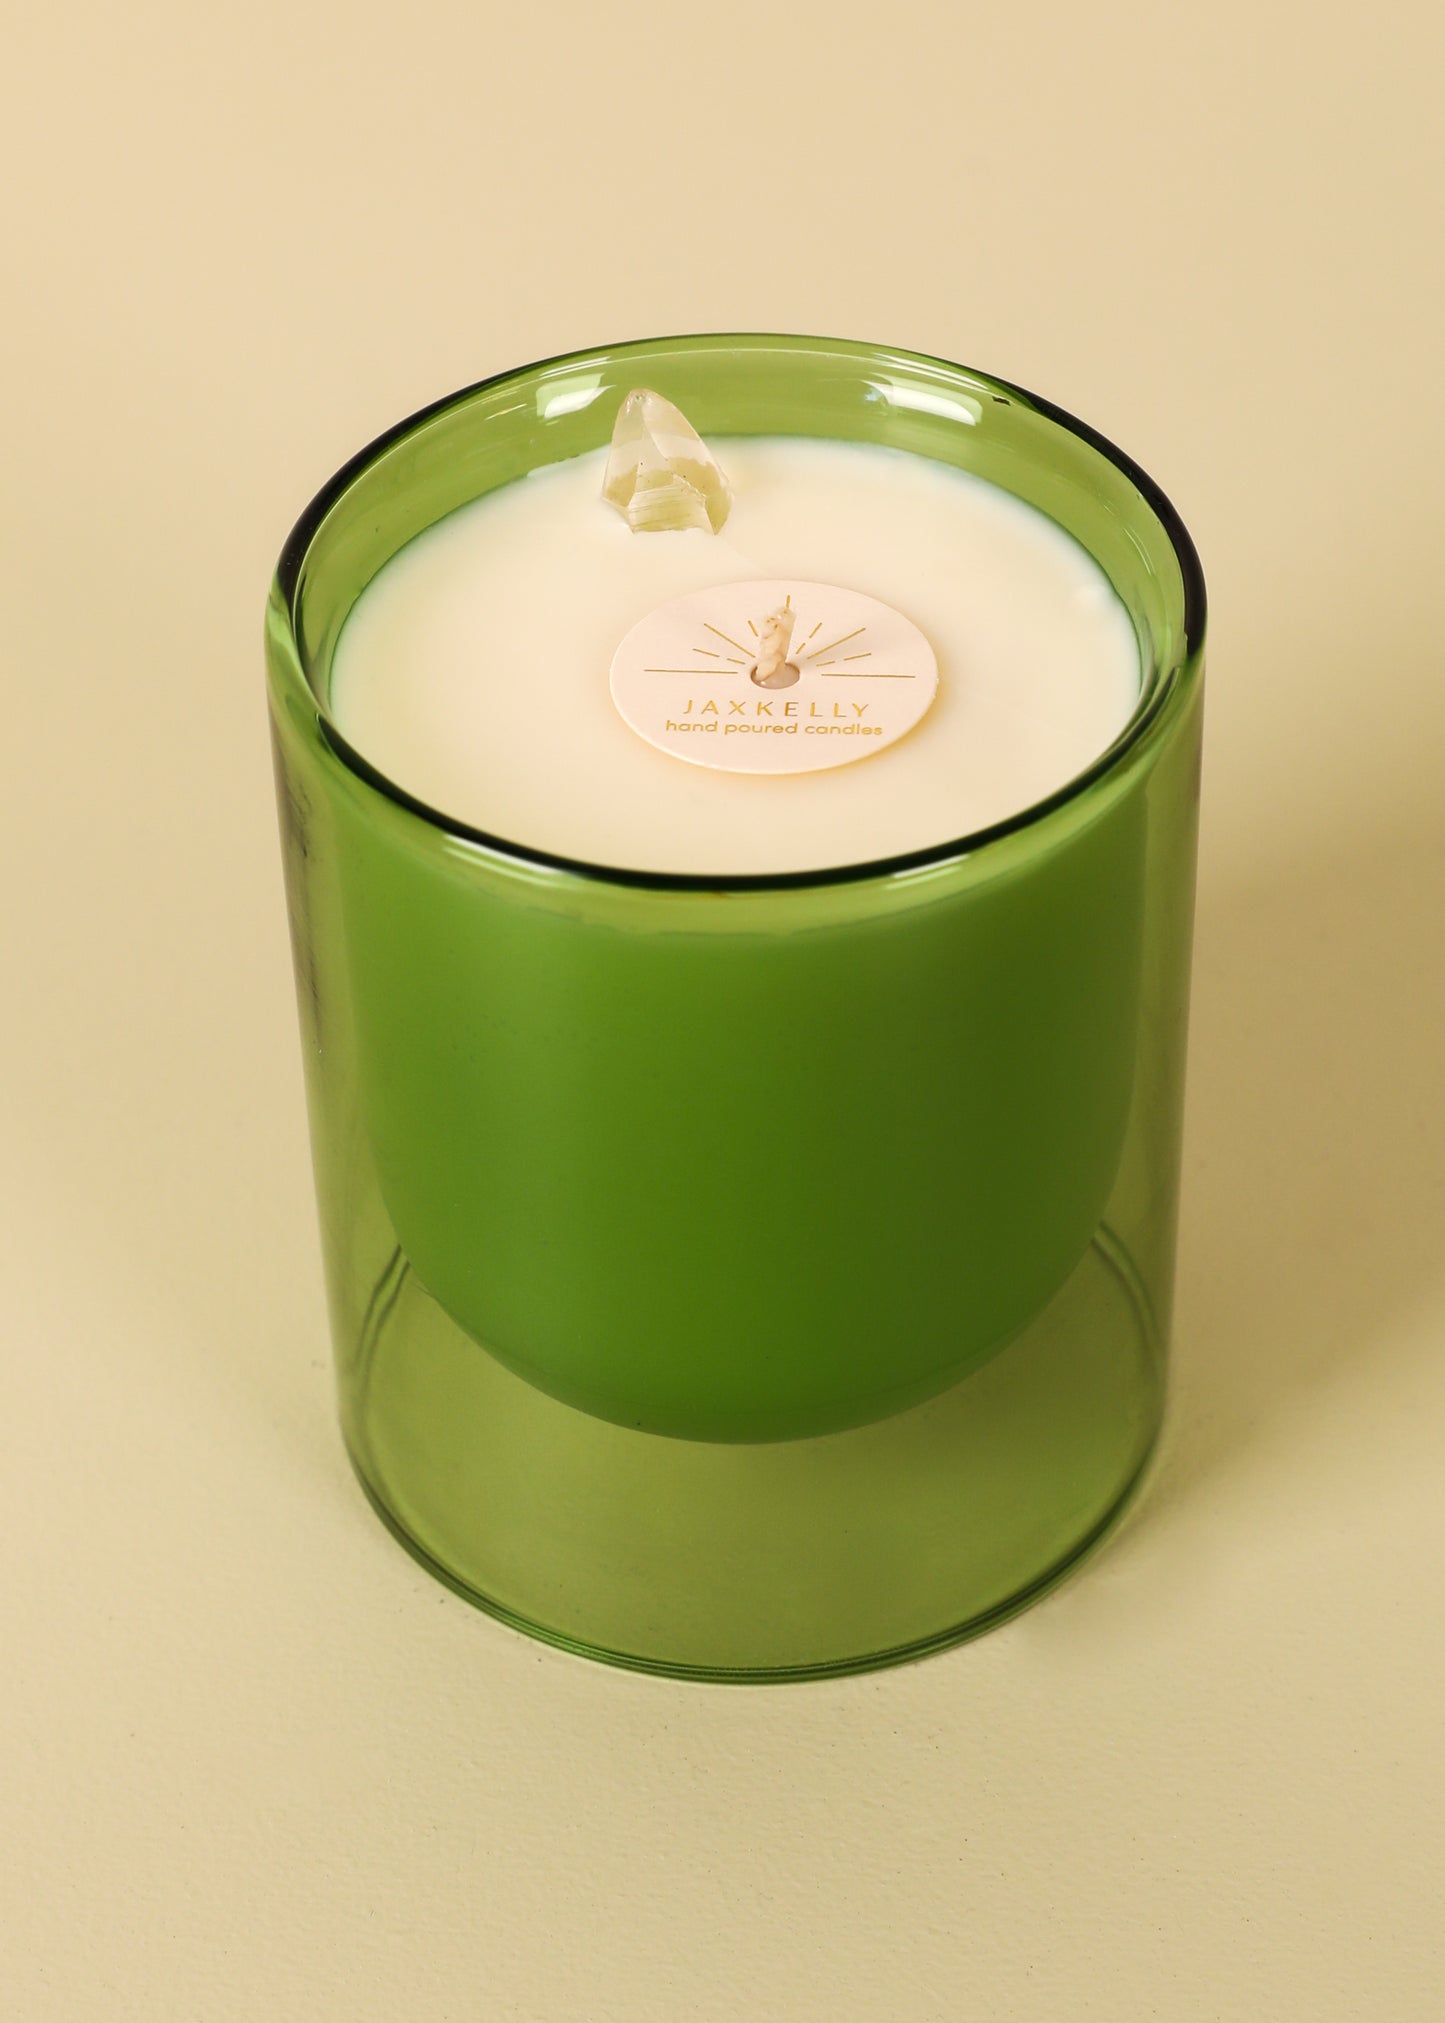 Parakeet Scooped Candle - Ambiance Collection